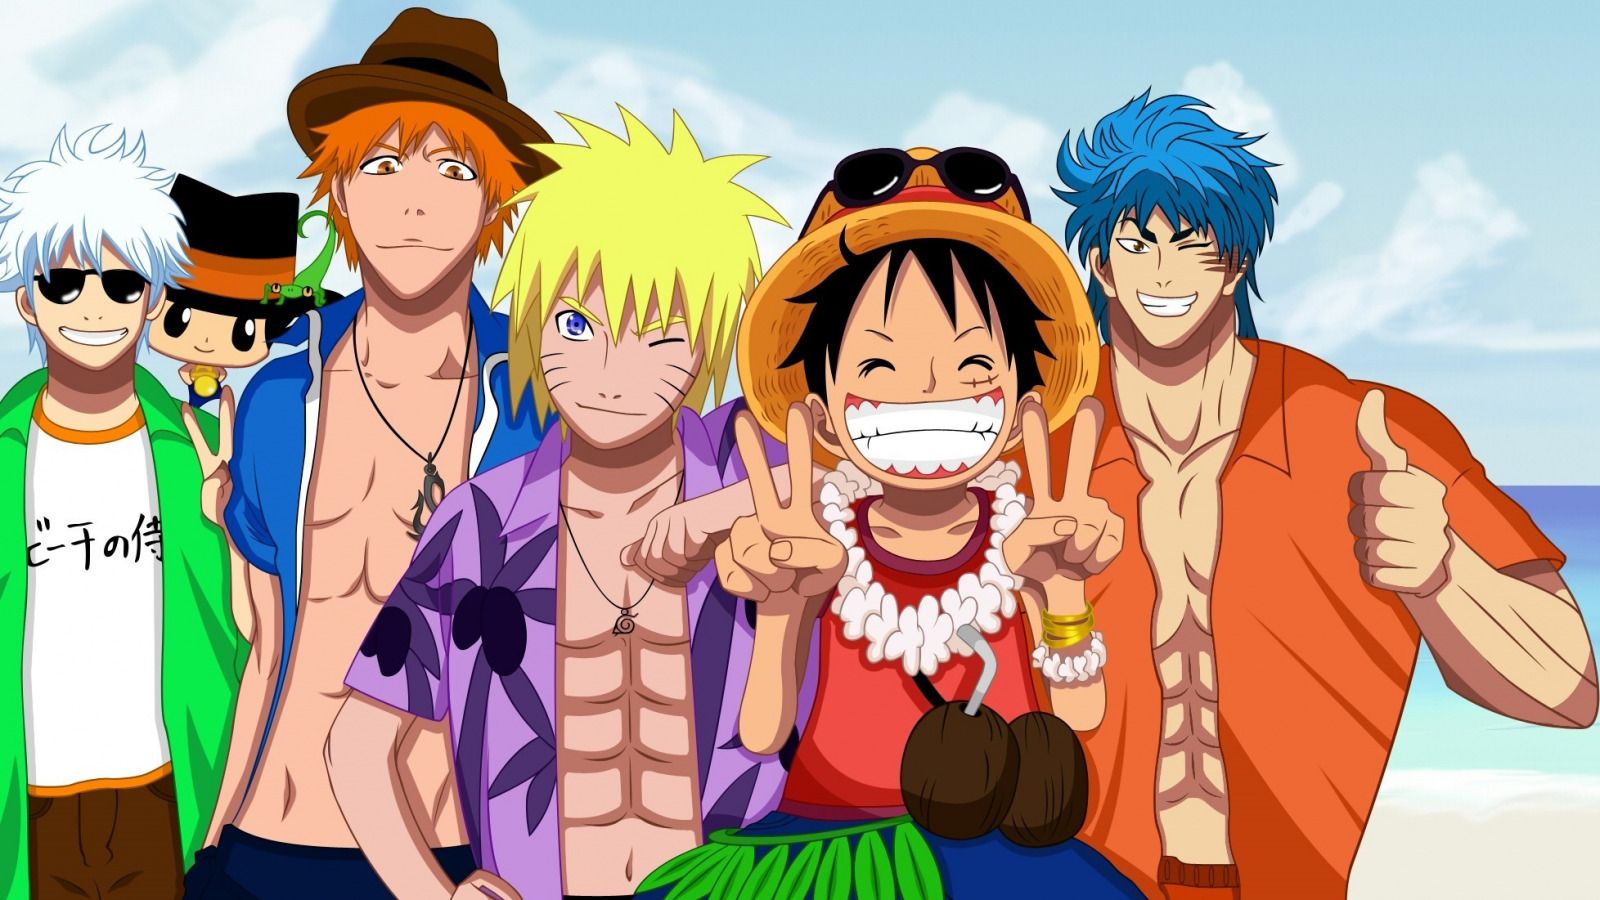 Anime One Piece And Naruto Wallpapers - Wallpaper Cave